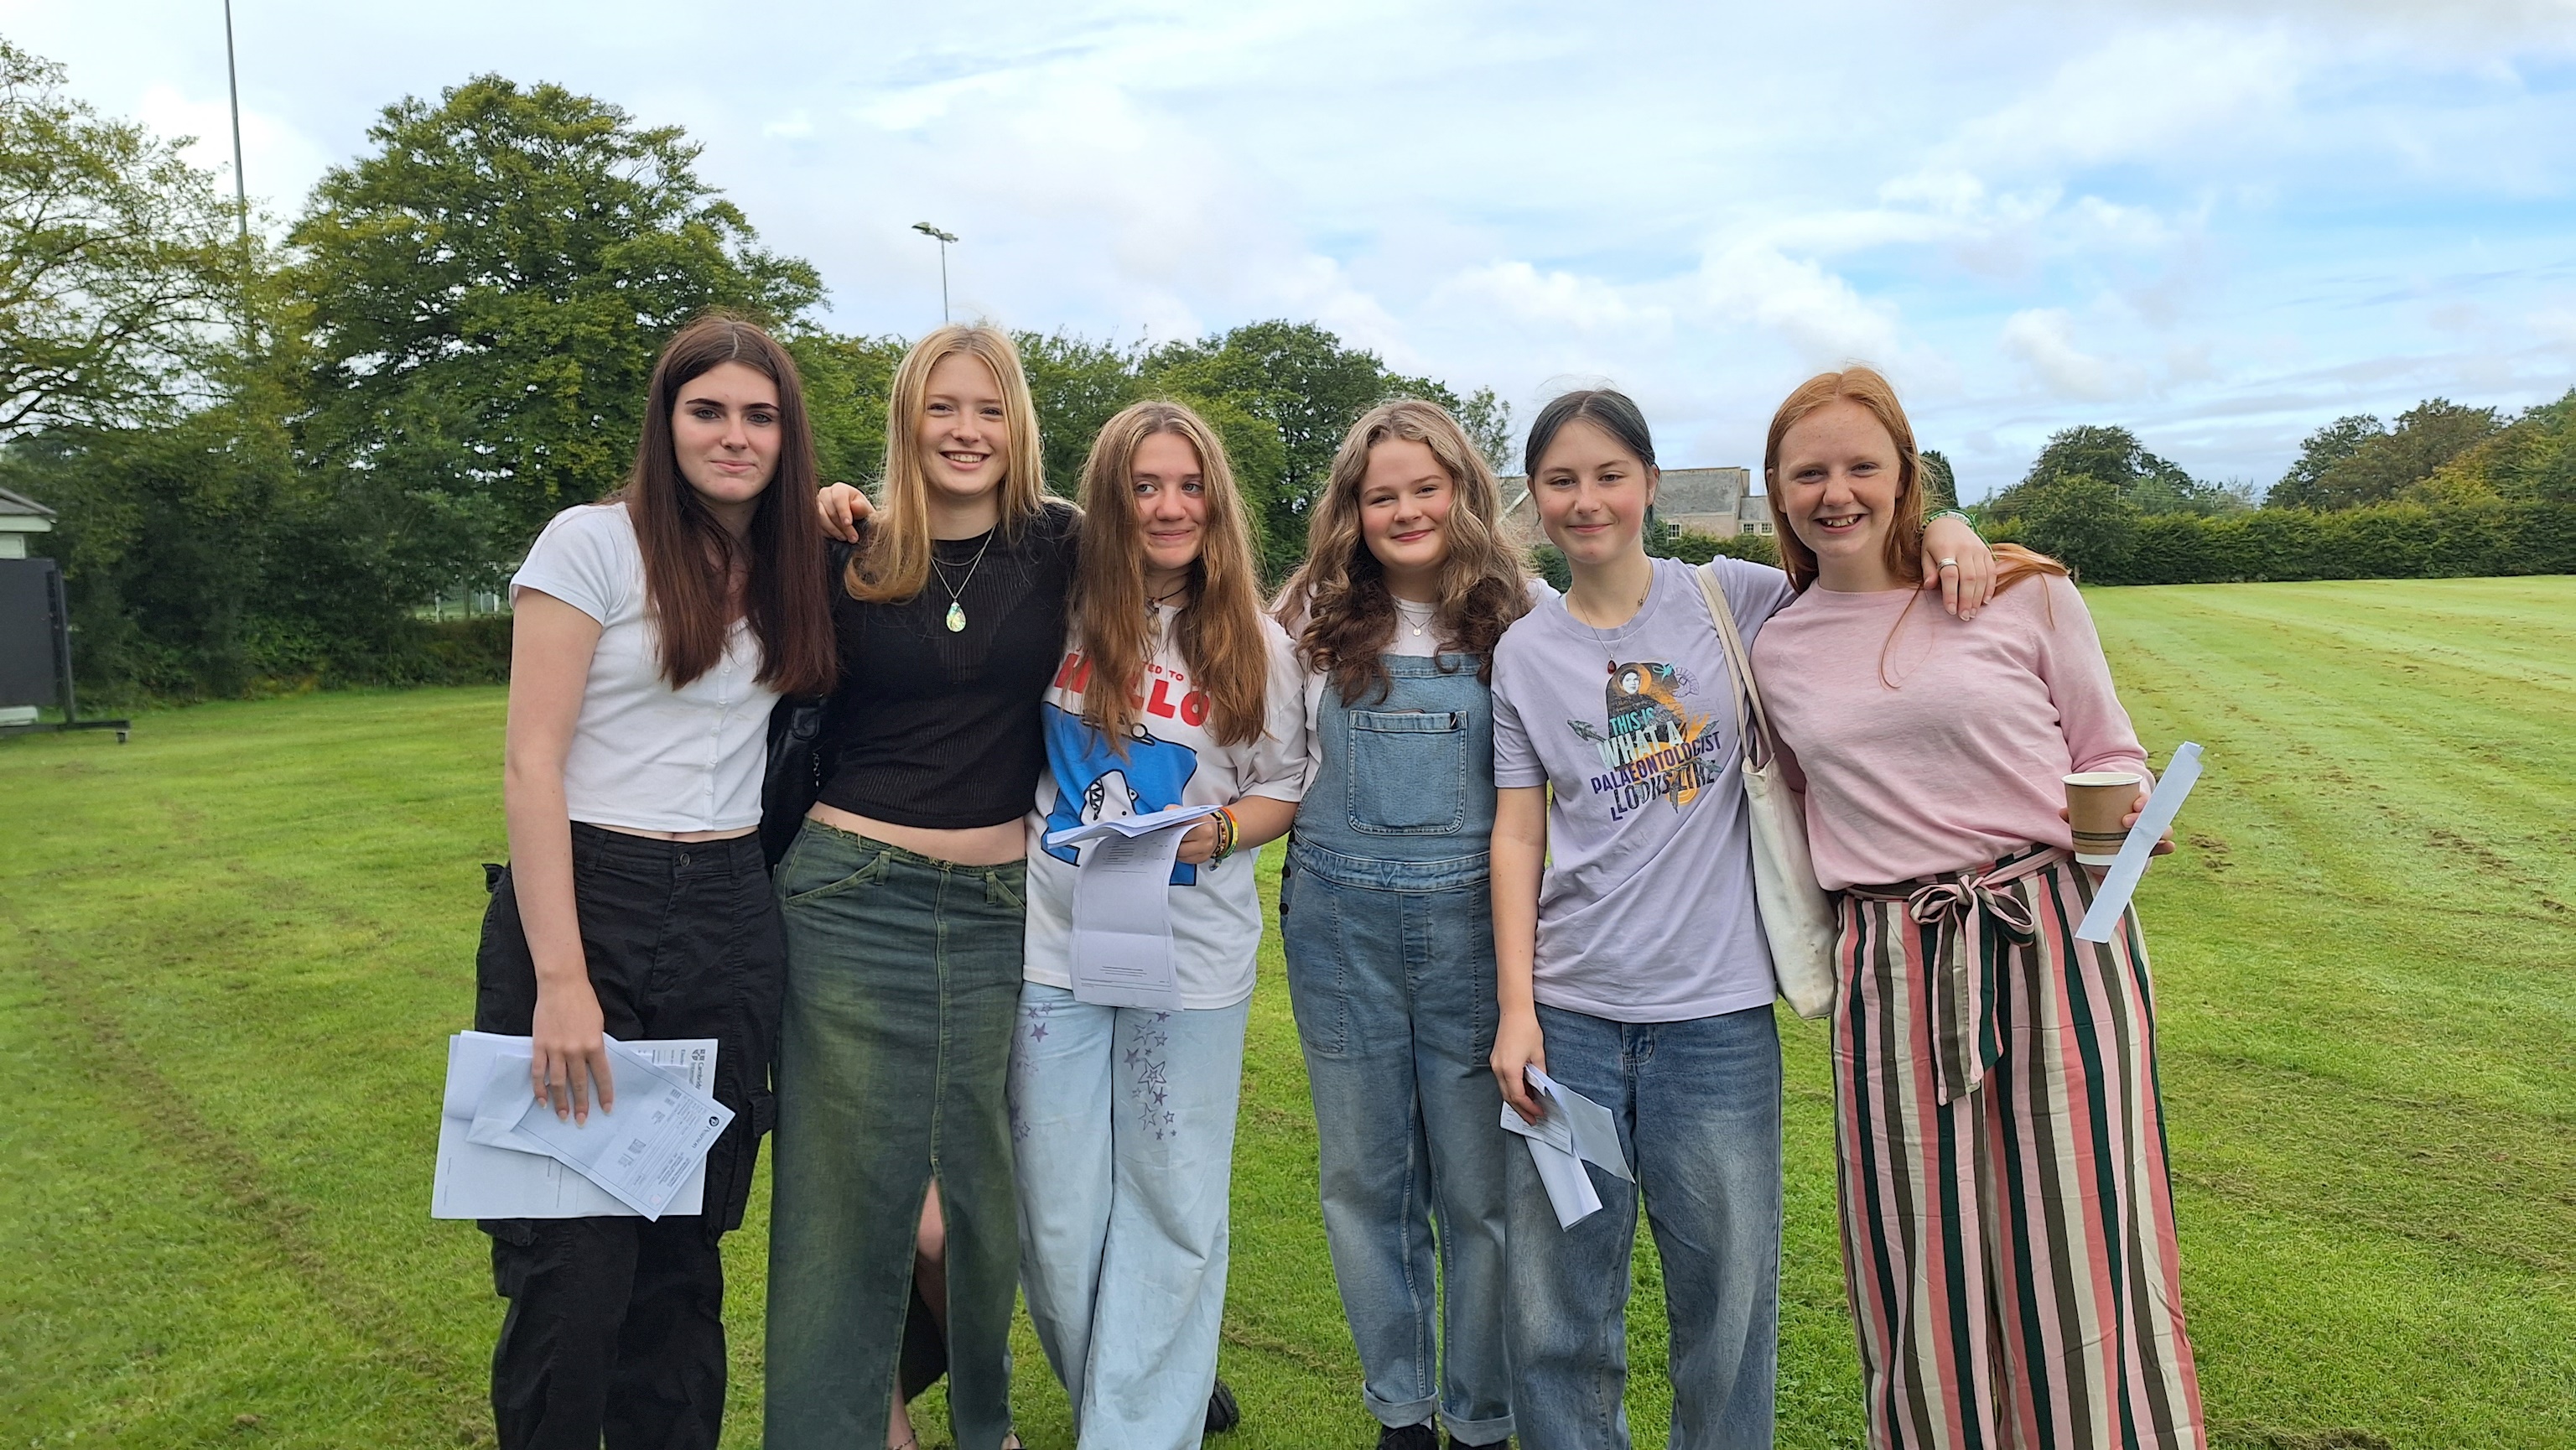 Celebrations all round as Shebbear College students receive excellent GCSE results